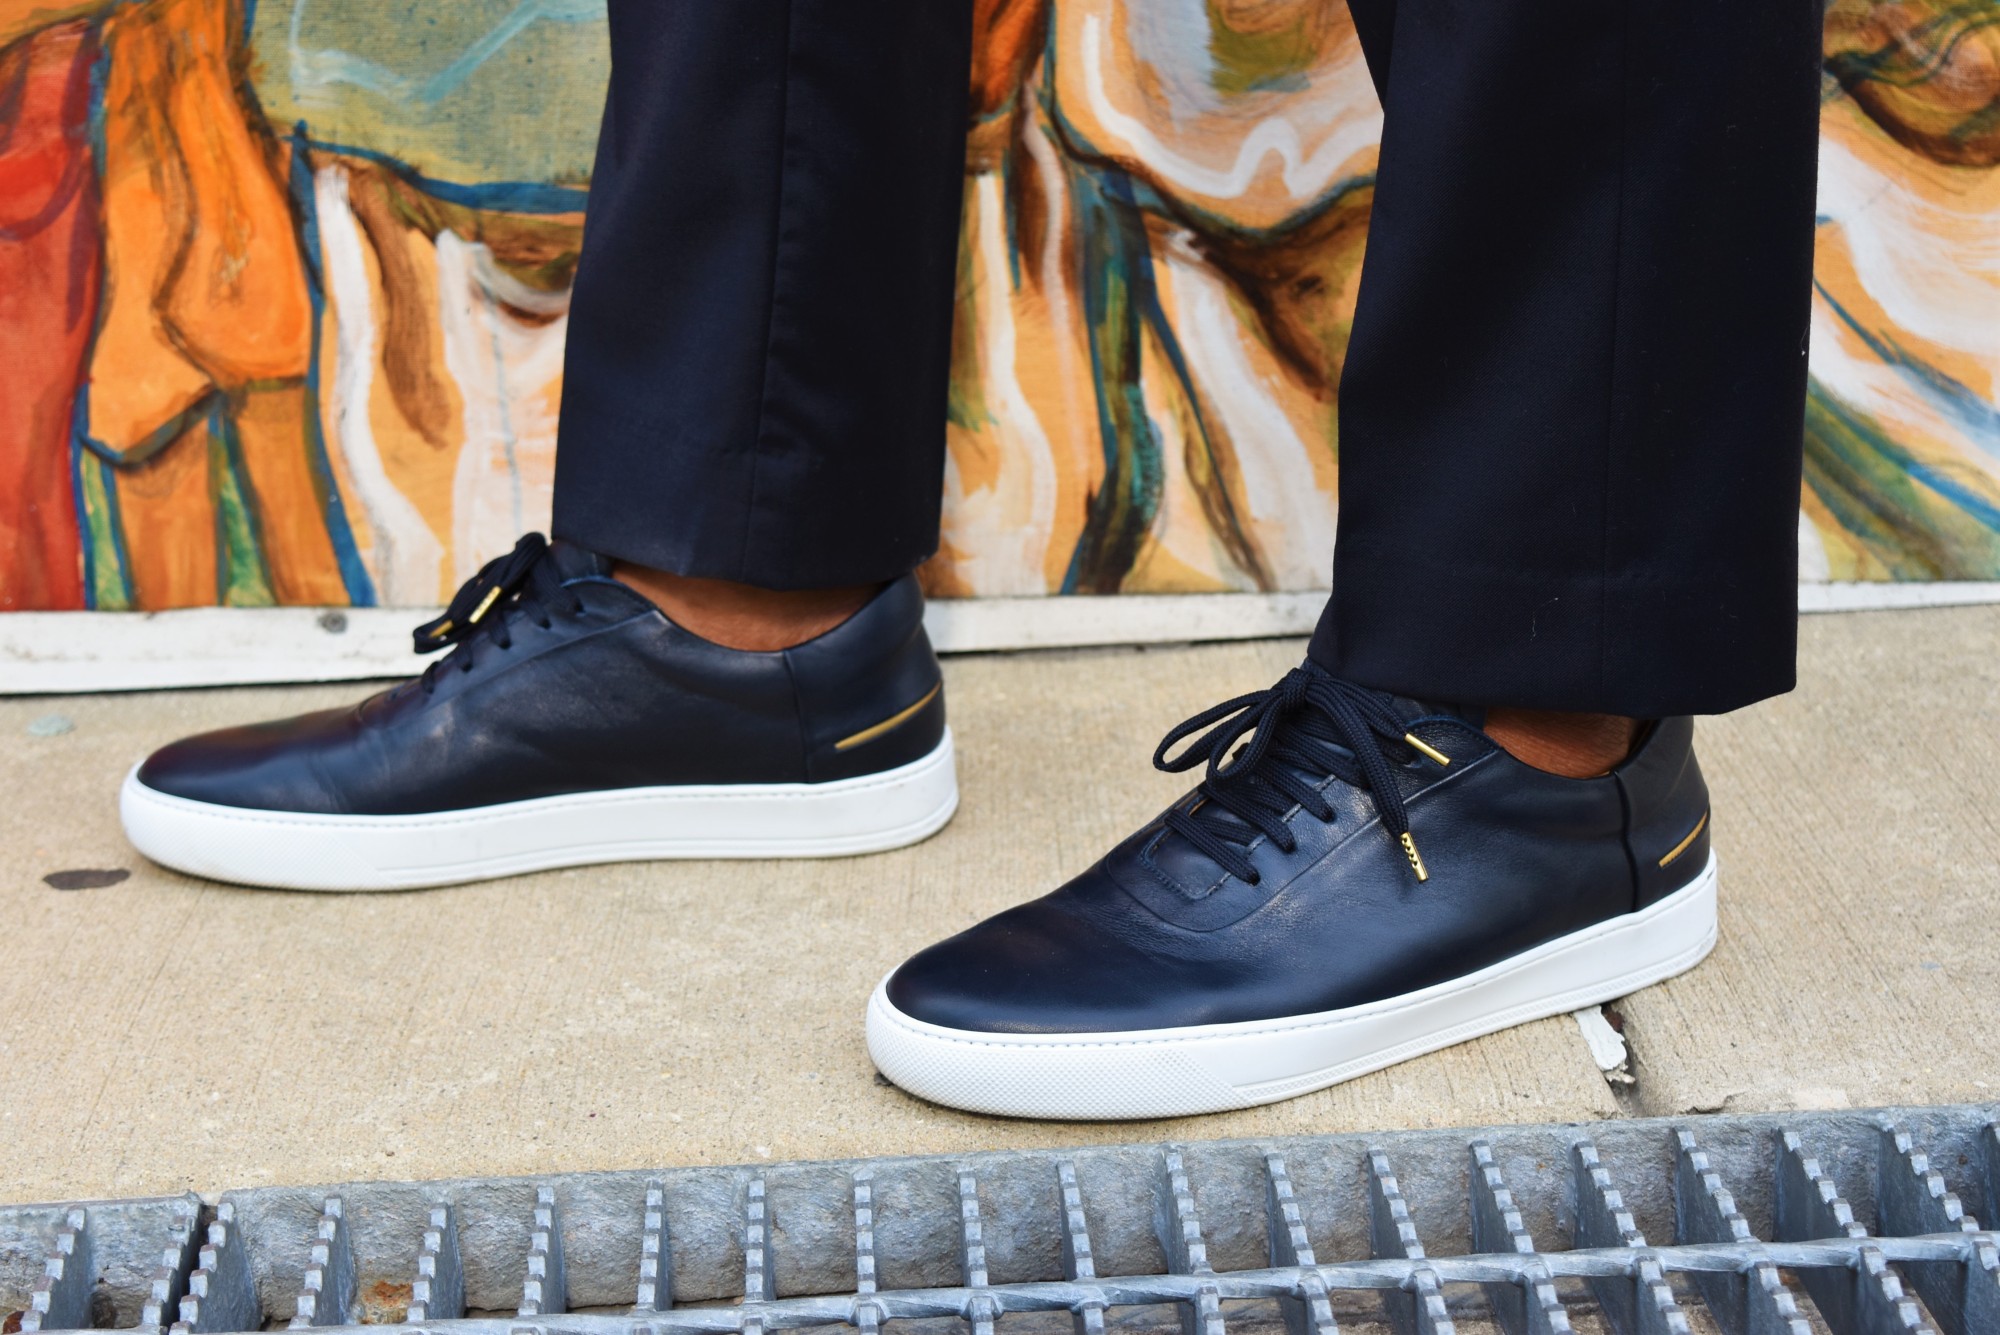 RIST's Navy Leather Wynwood Low Top Sneakers